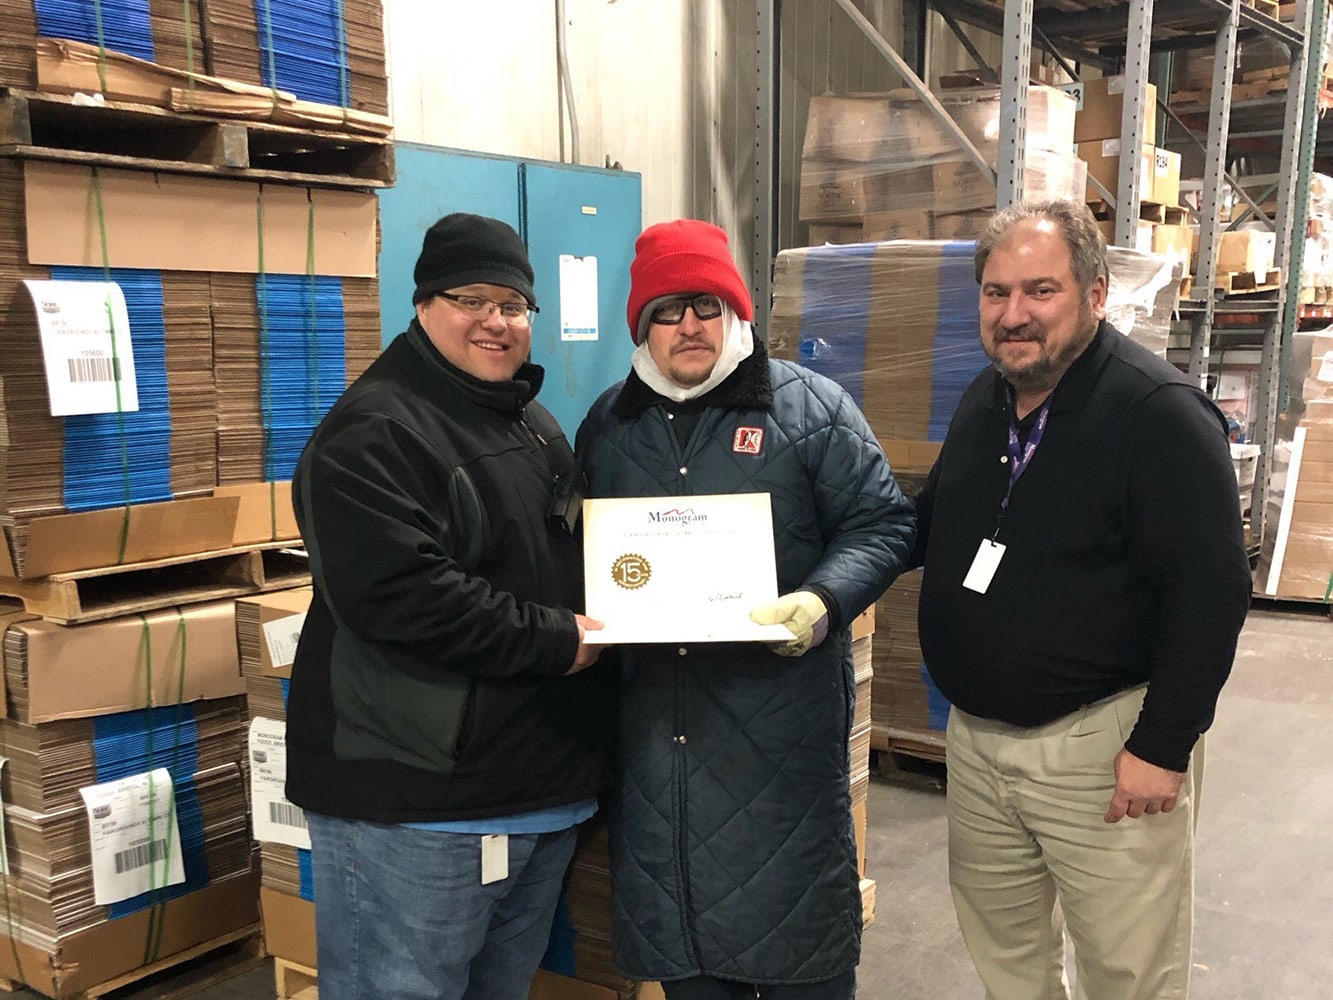 Harlan employee receives certification for 15 years of employment